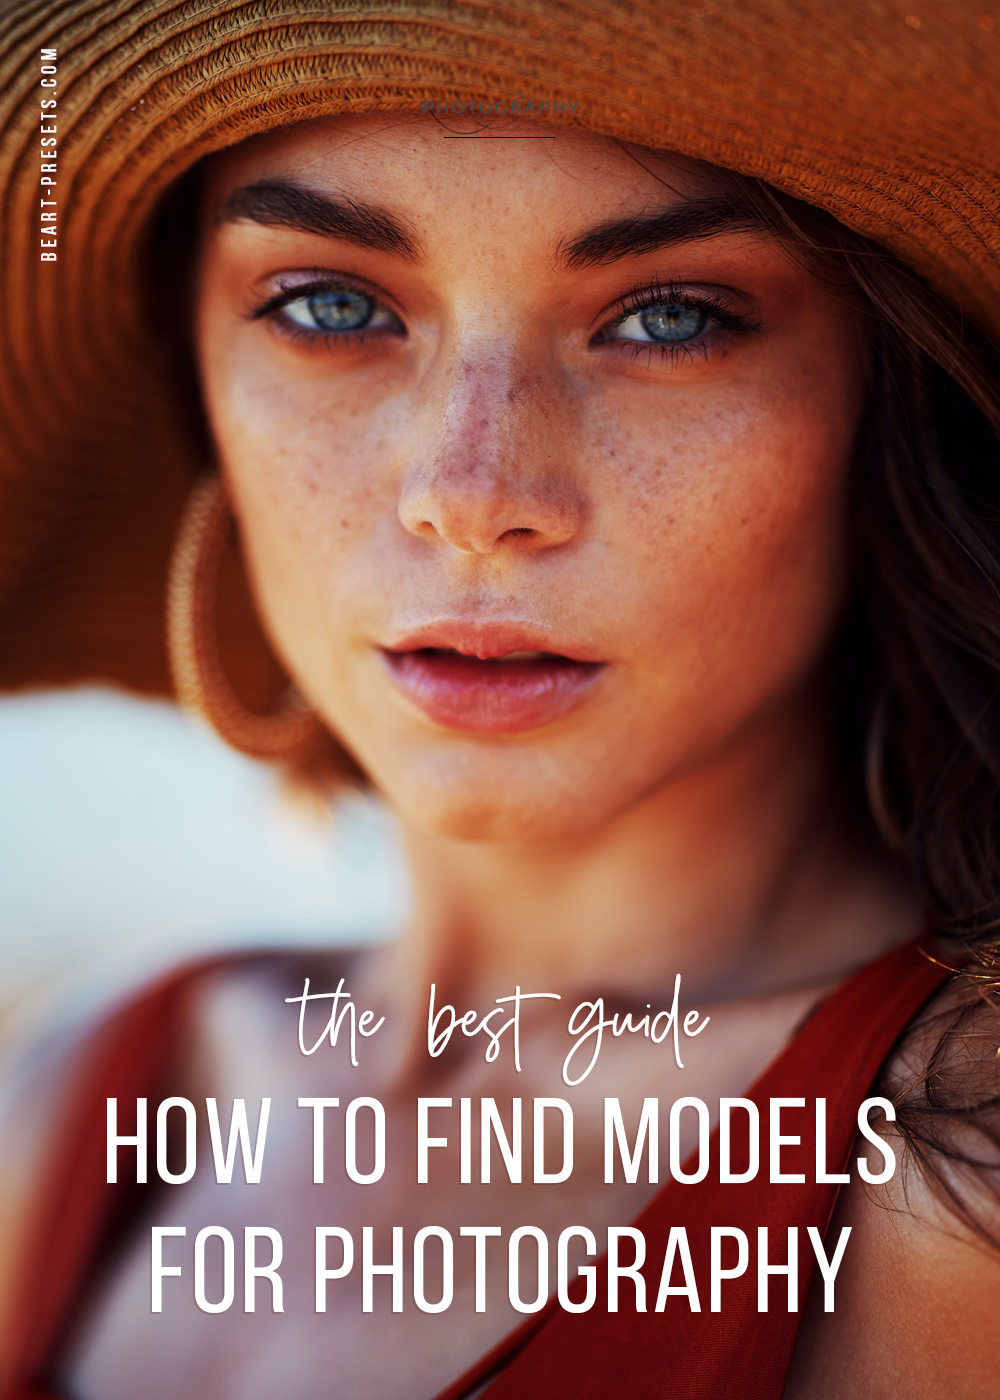 The Best Guide How to Find Models for Photography pic